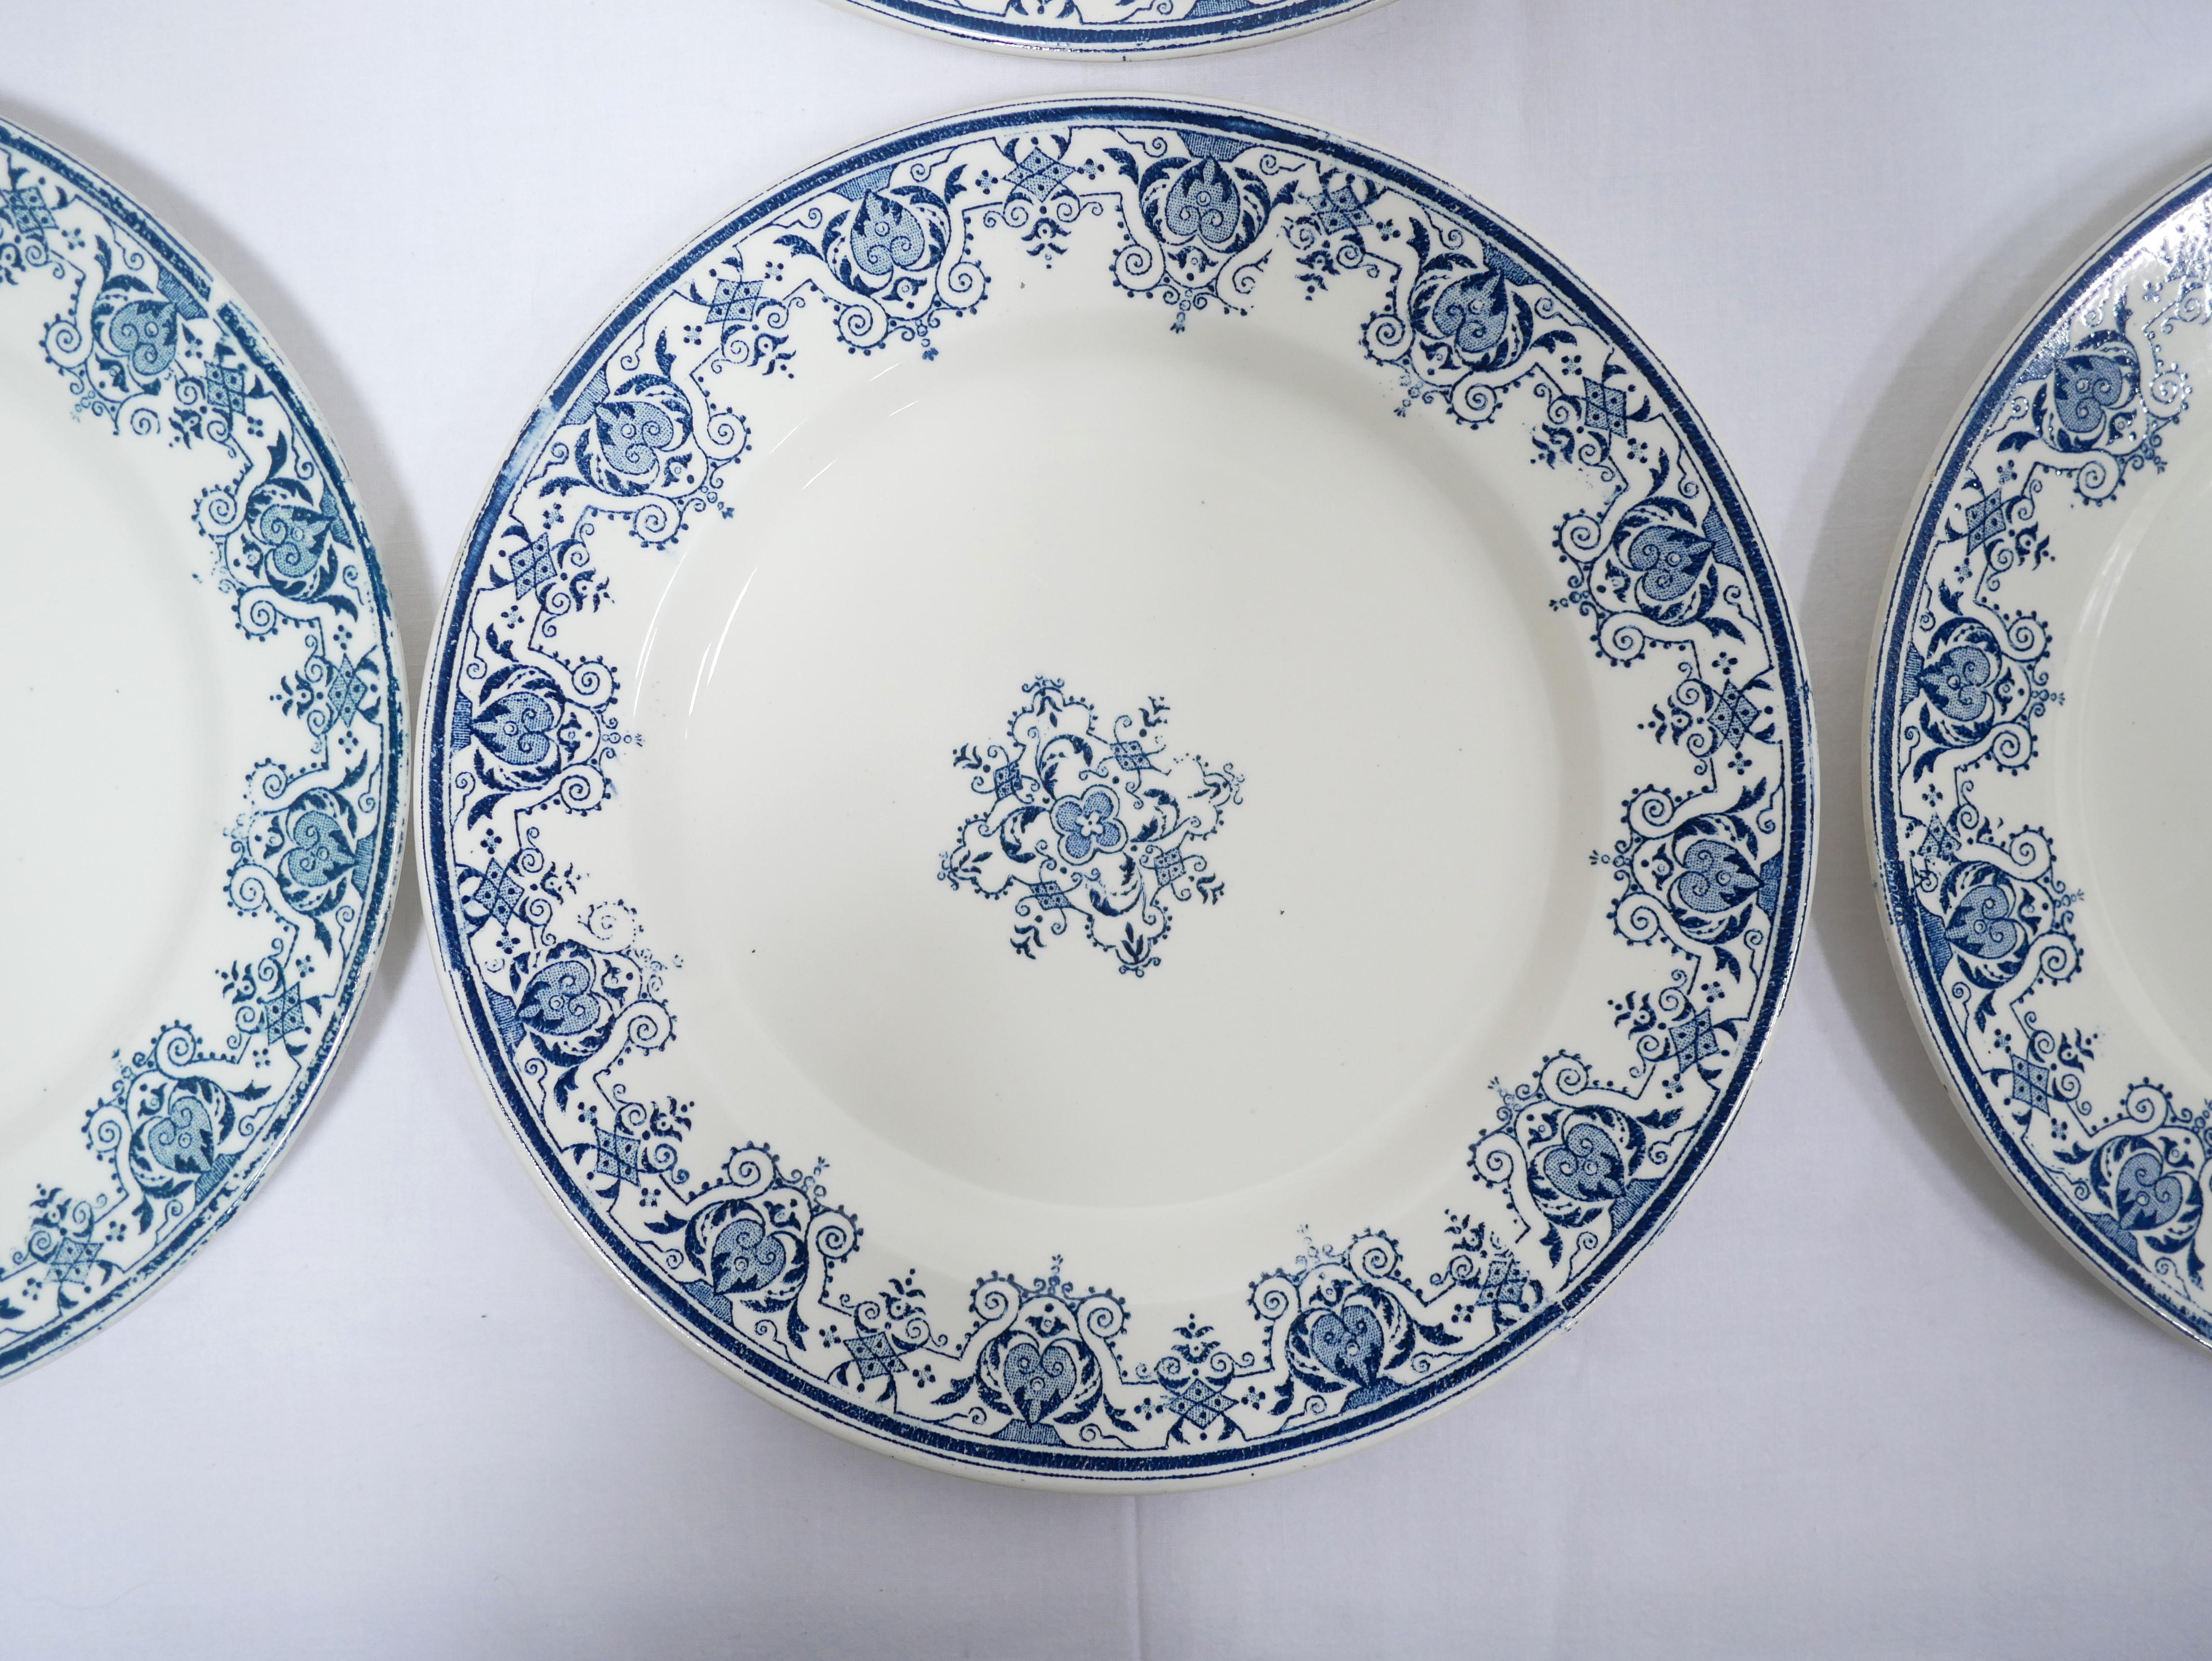 Series of 10 Old Terre De Fer Plates by L.G. for the Clairefontaine Earthenware For Sale 2